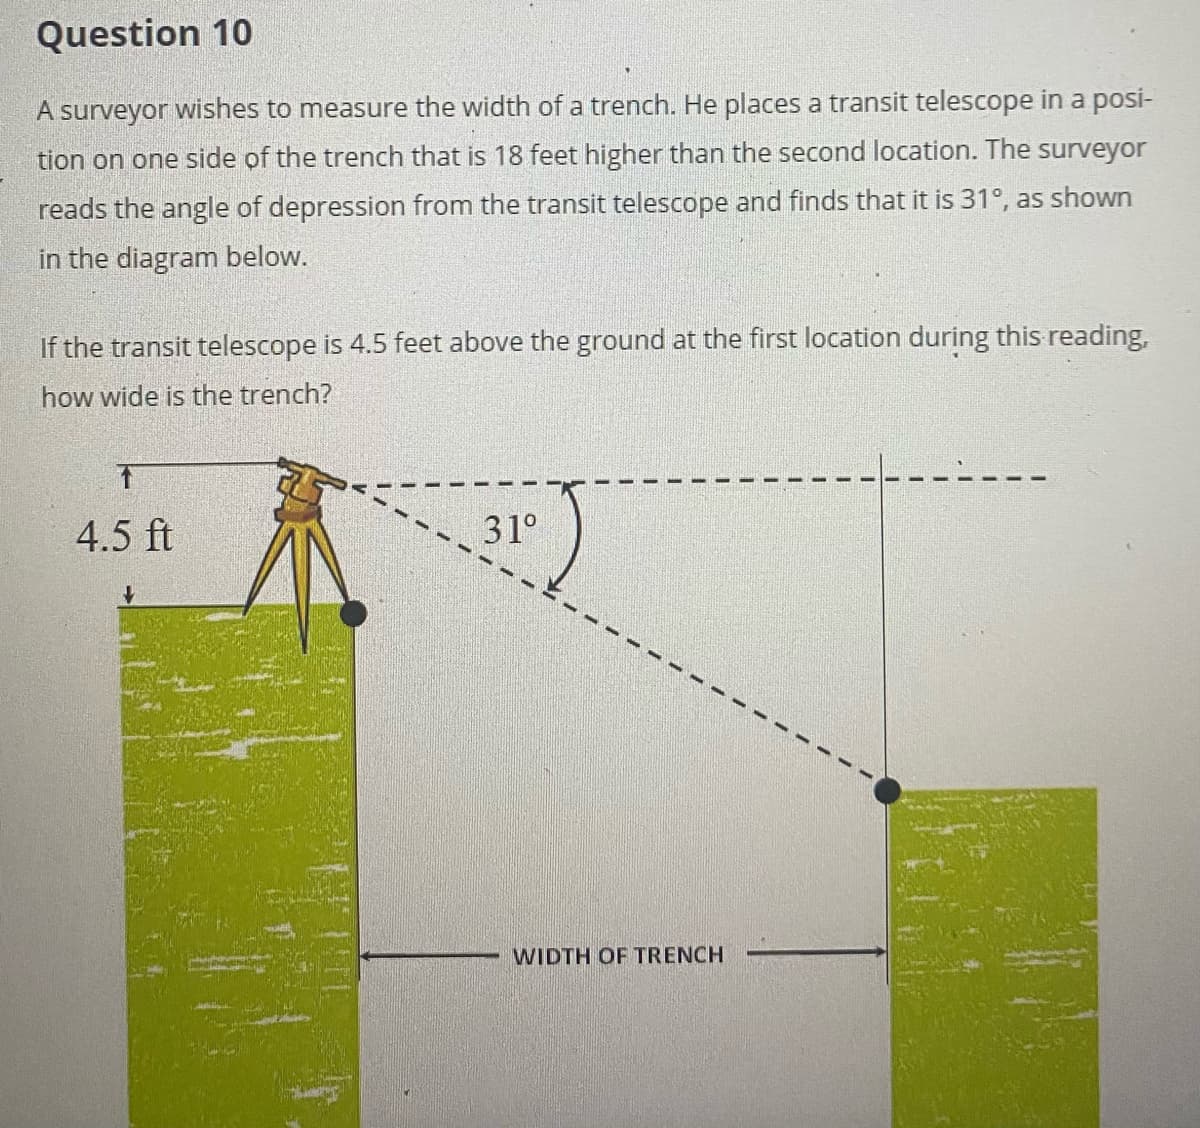 Question 10
A surveyor wishes to measure the width of a trench. He places a transit telescope in a posi-
tion on one side of the trench that is 18 feet higher than the second location. The surveyor
reads the angle of depression from the transit telescope and finds that it is 31°, as shown
in the diagram below.
If the transit telescope is 4.5 feet above the ground at the first location during this reading,
how wide is the trench?
4.5 ft
31°
WIDTH OF TRENCH
